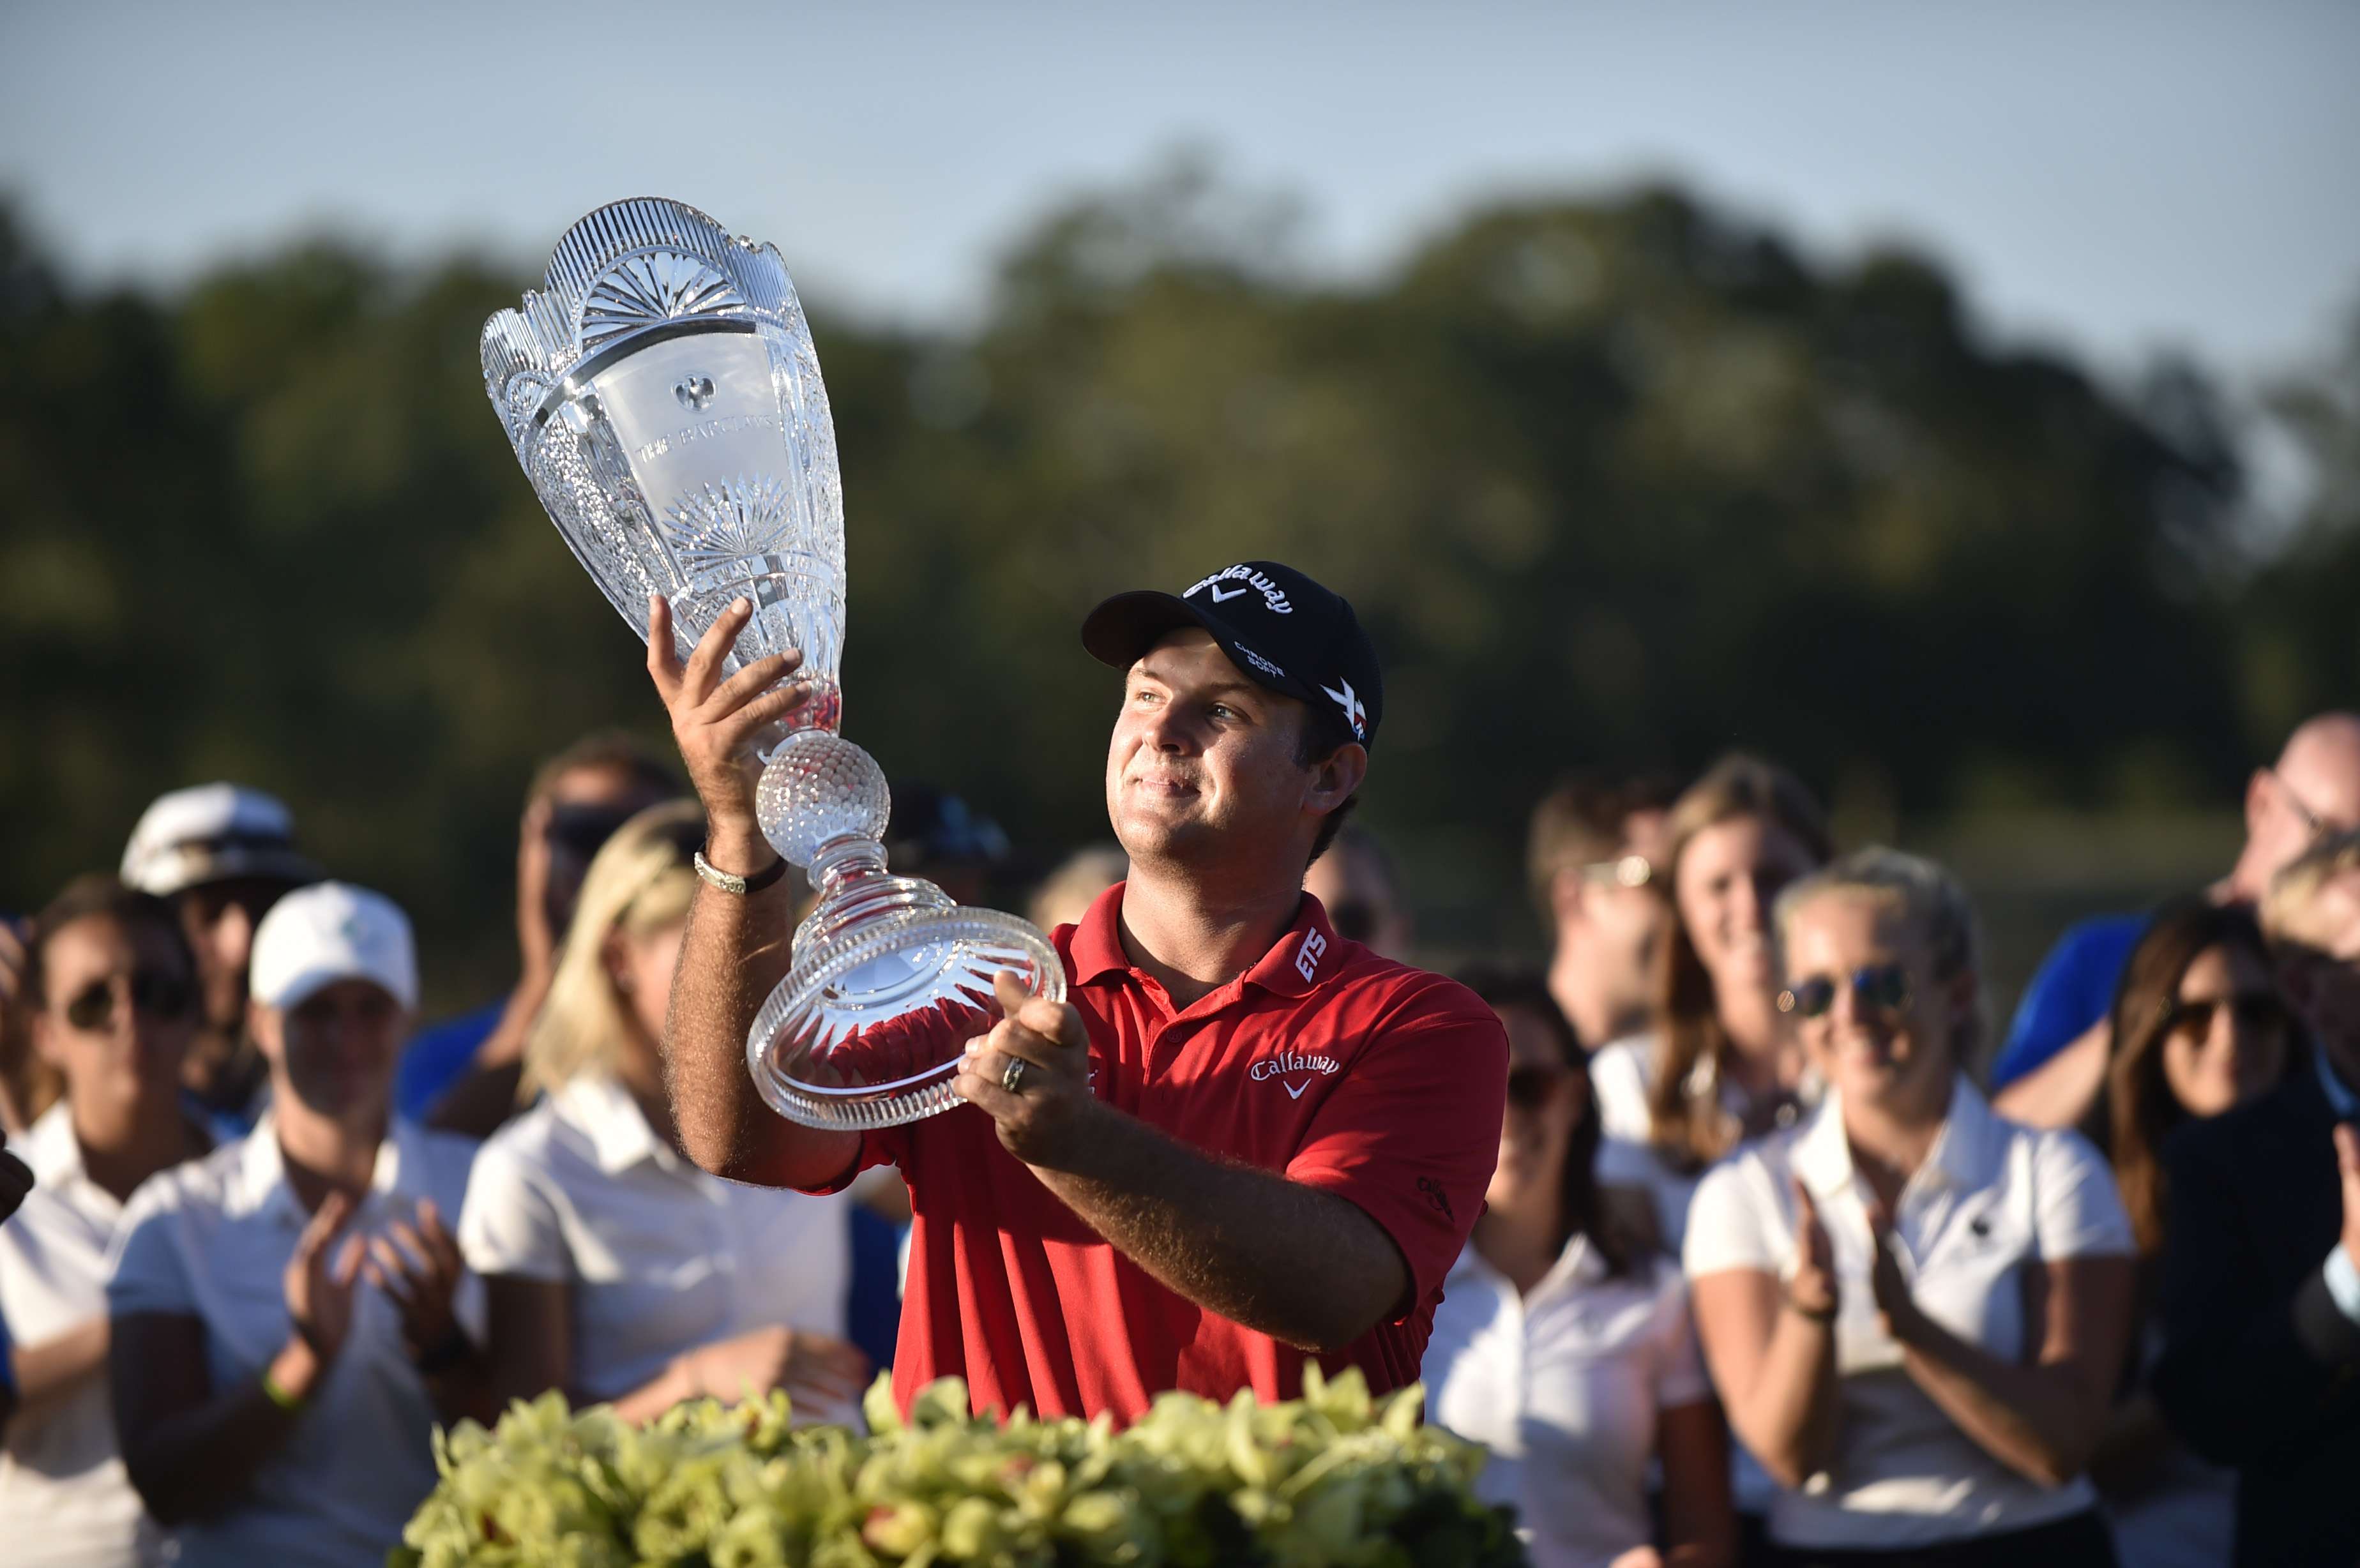 USA’s Patrick Reed celebrates his win at The Barclays at Bethpage State Park. Photo: USA Today